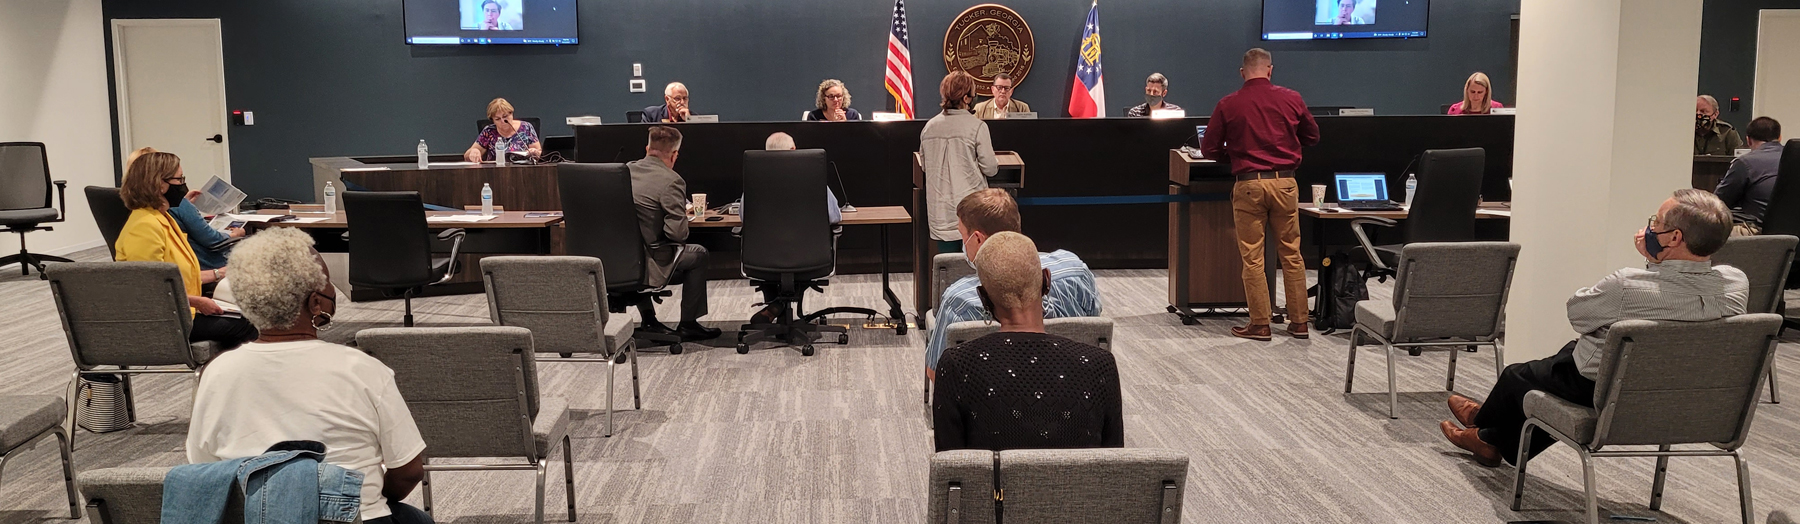 Tucker City Council work session on August 23, 2021.